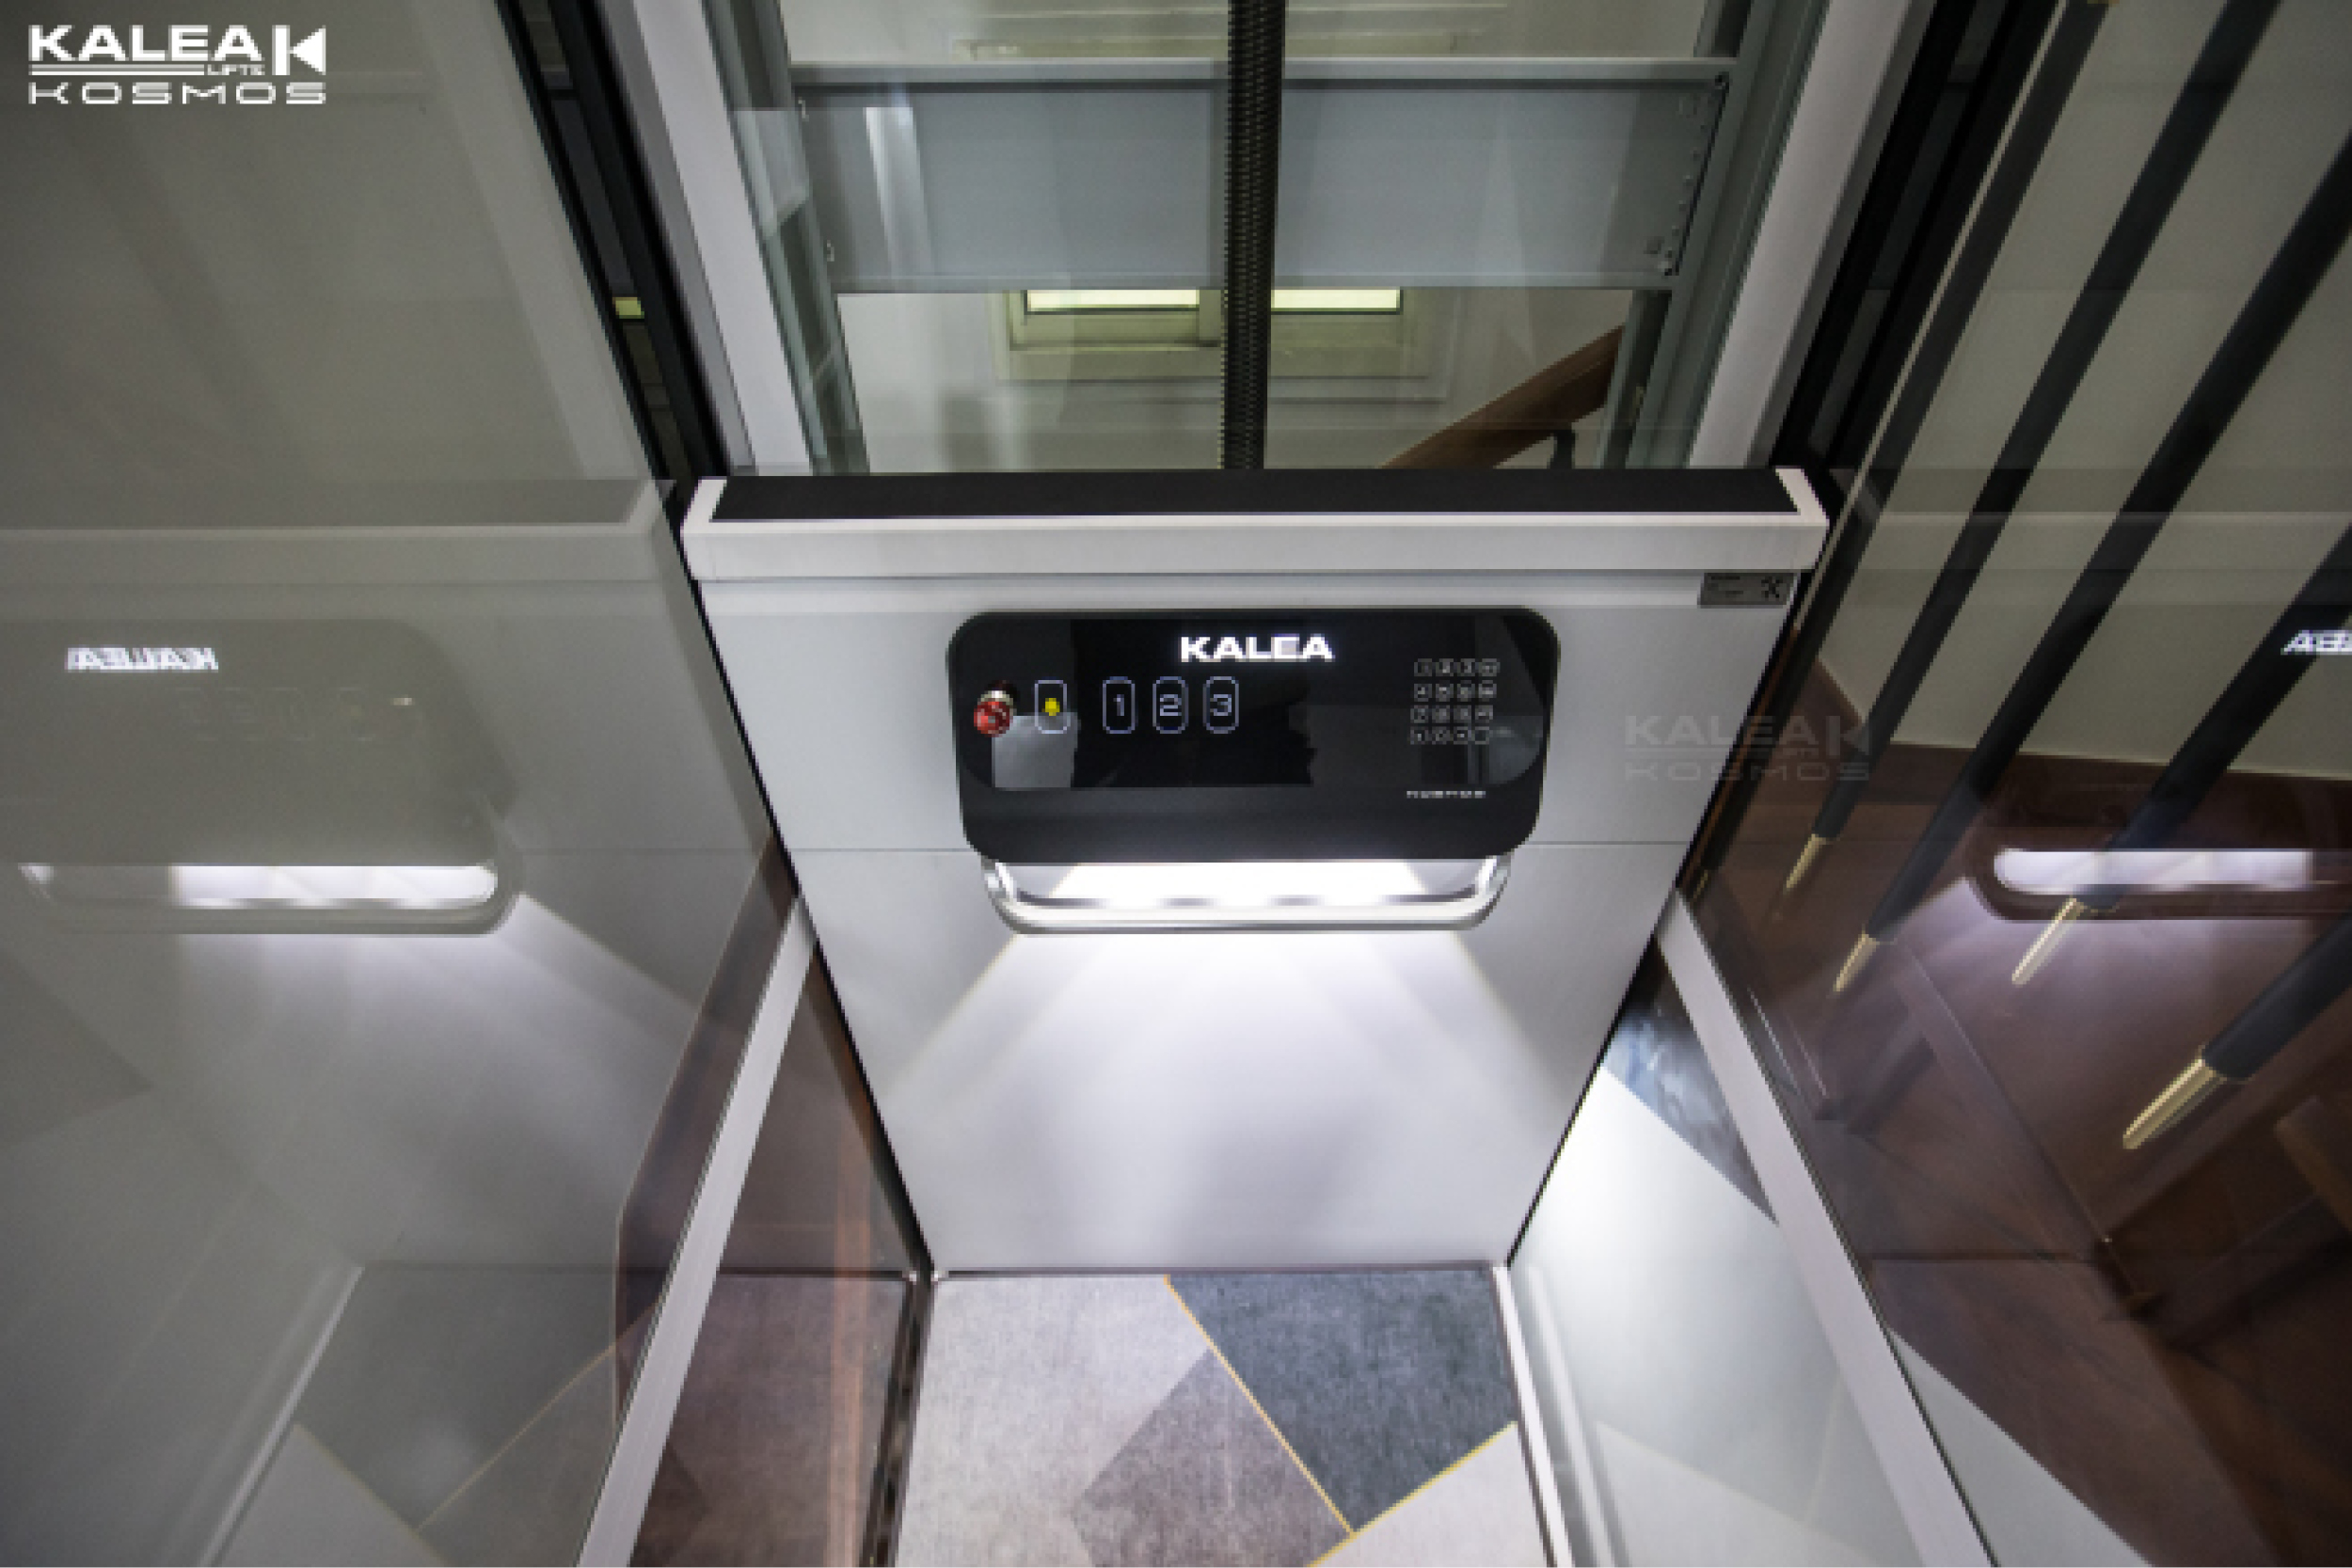 Private Home Middle Of Stair,Kosmos K90 model, All Glass Shaft Powder Coated White RAL9016